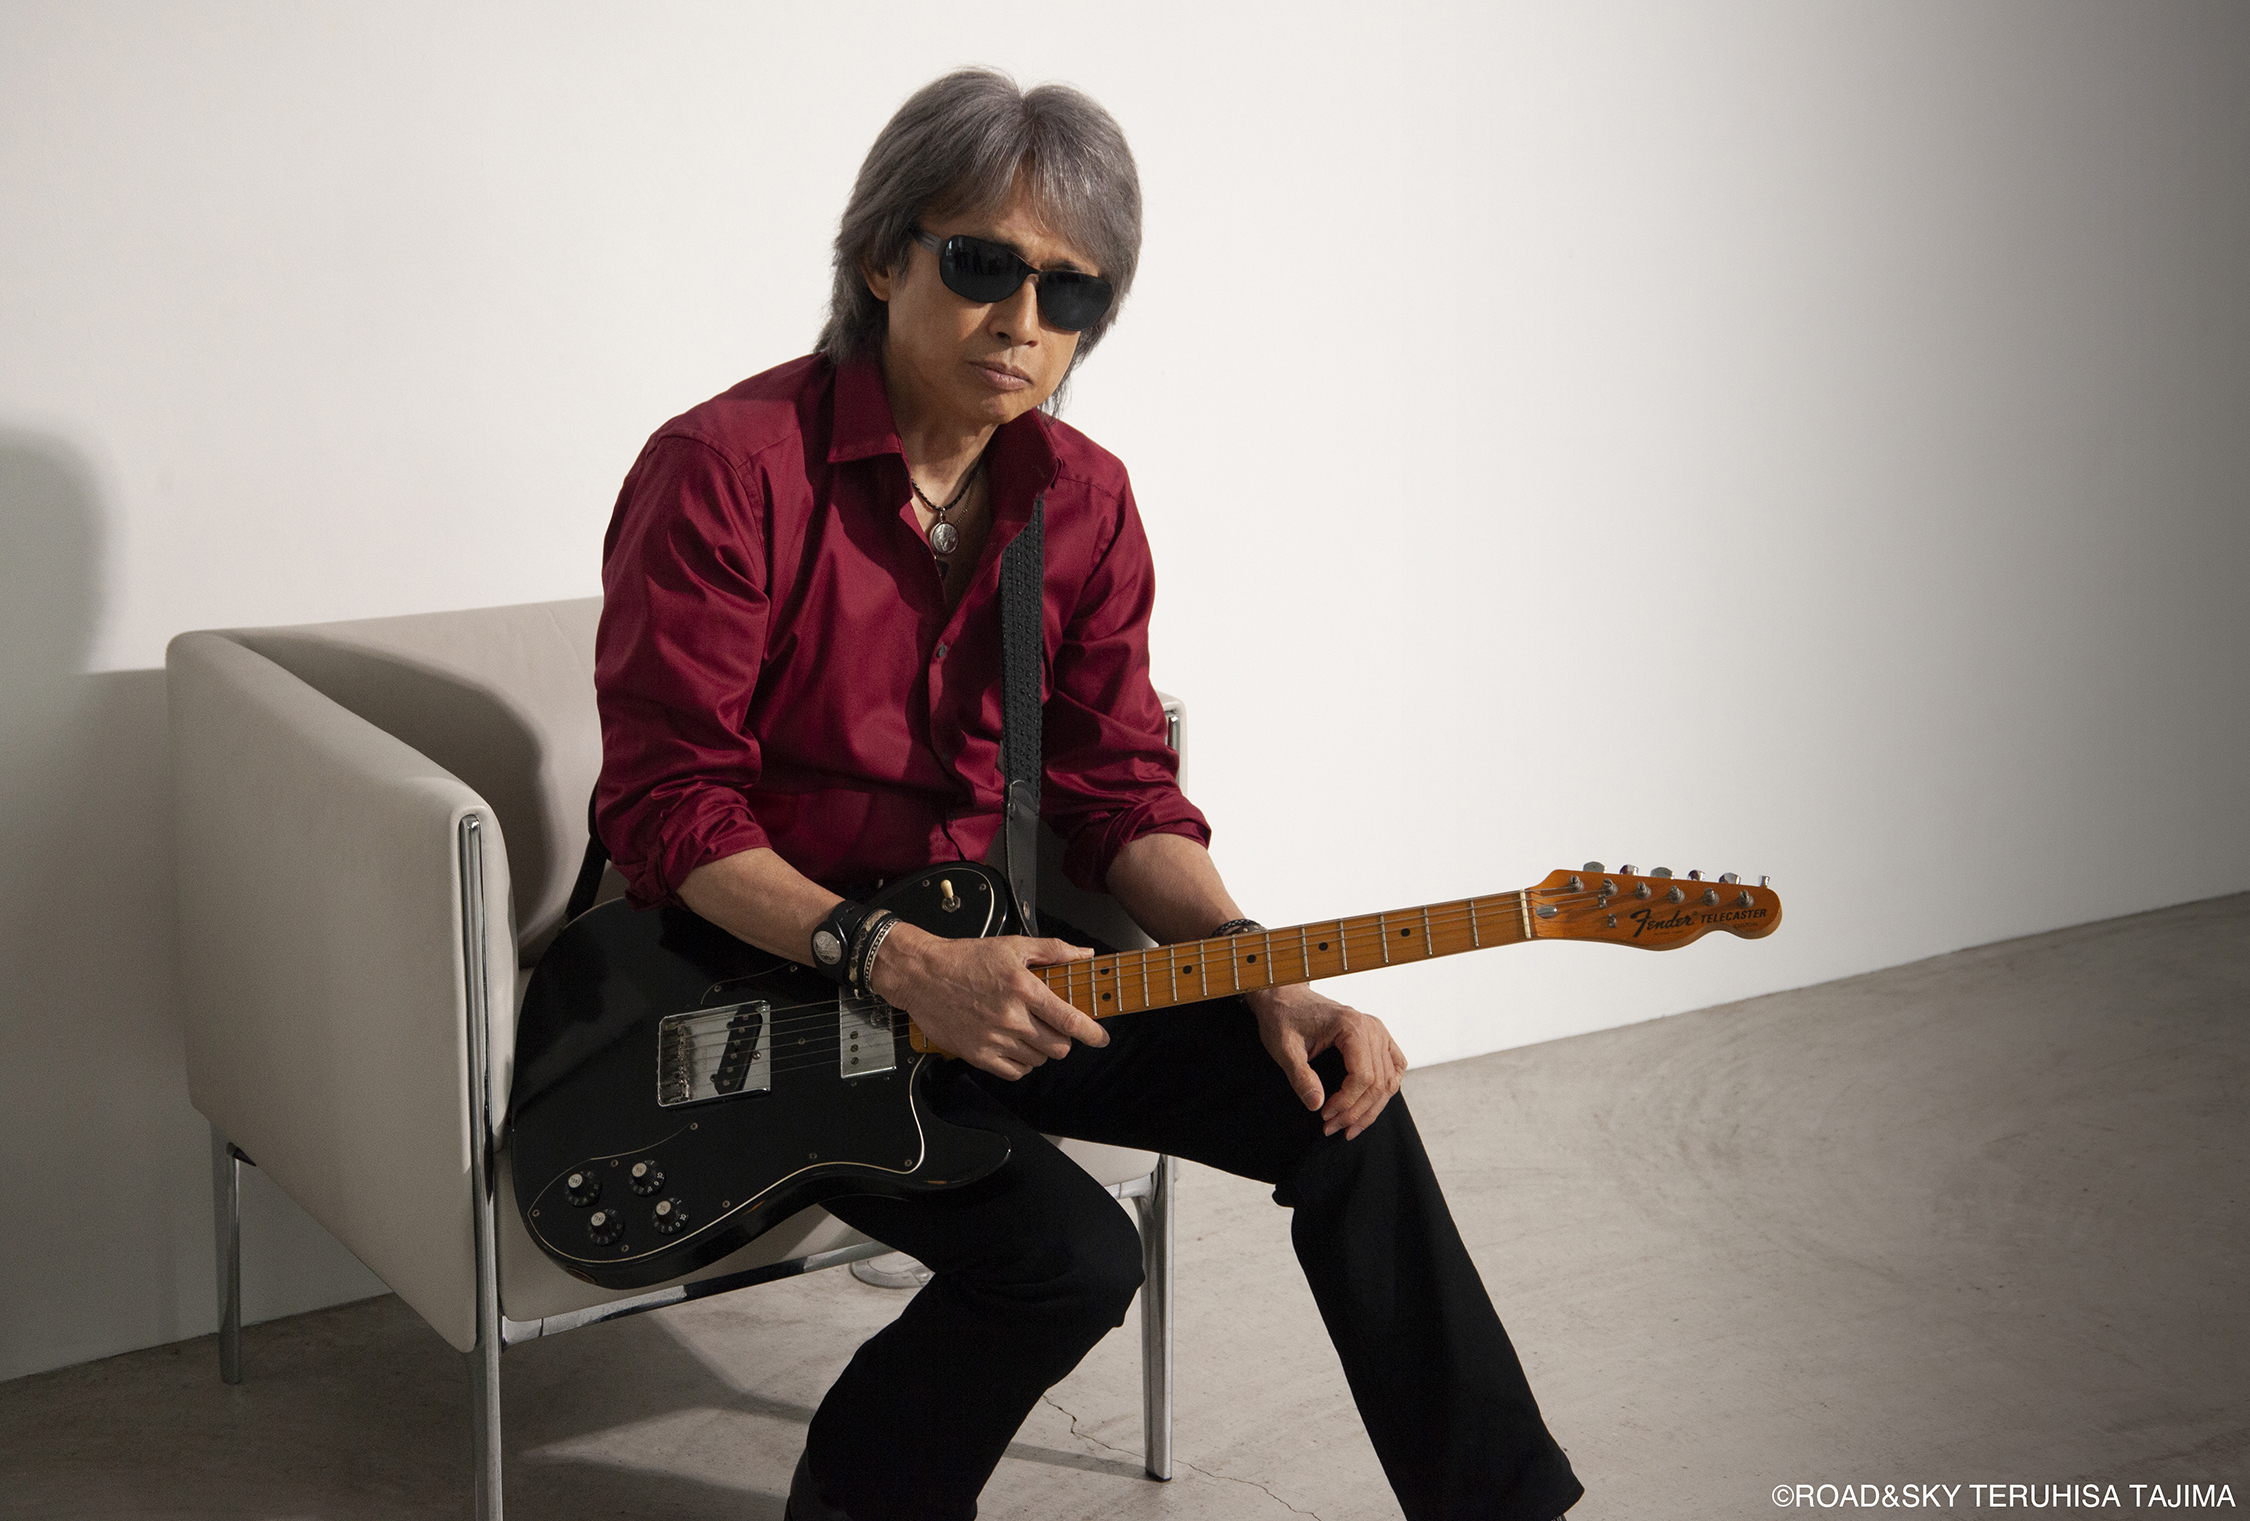 Shogo Hamada On The Road 2022 Welcome Back to The Rock Show “Eve” image